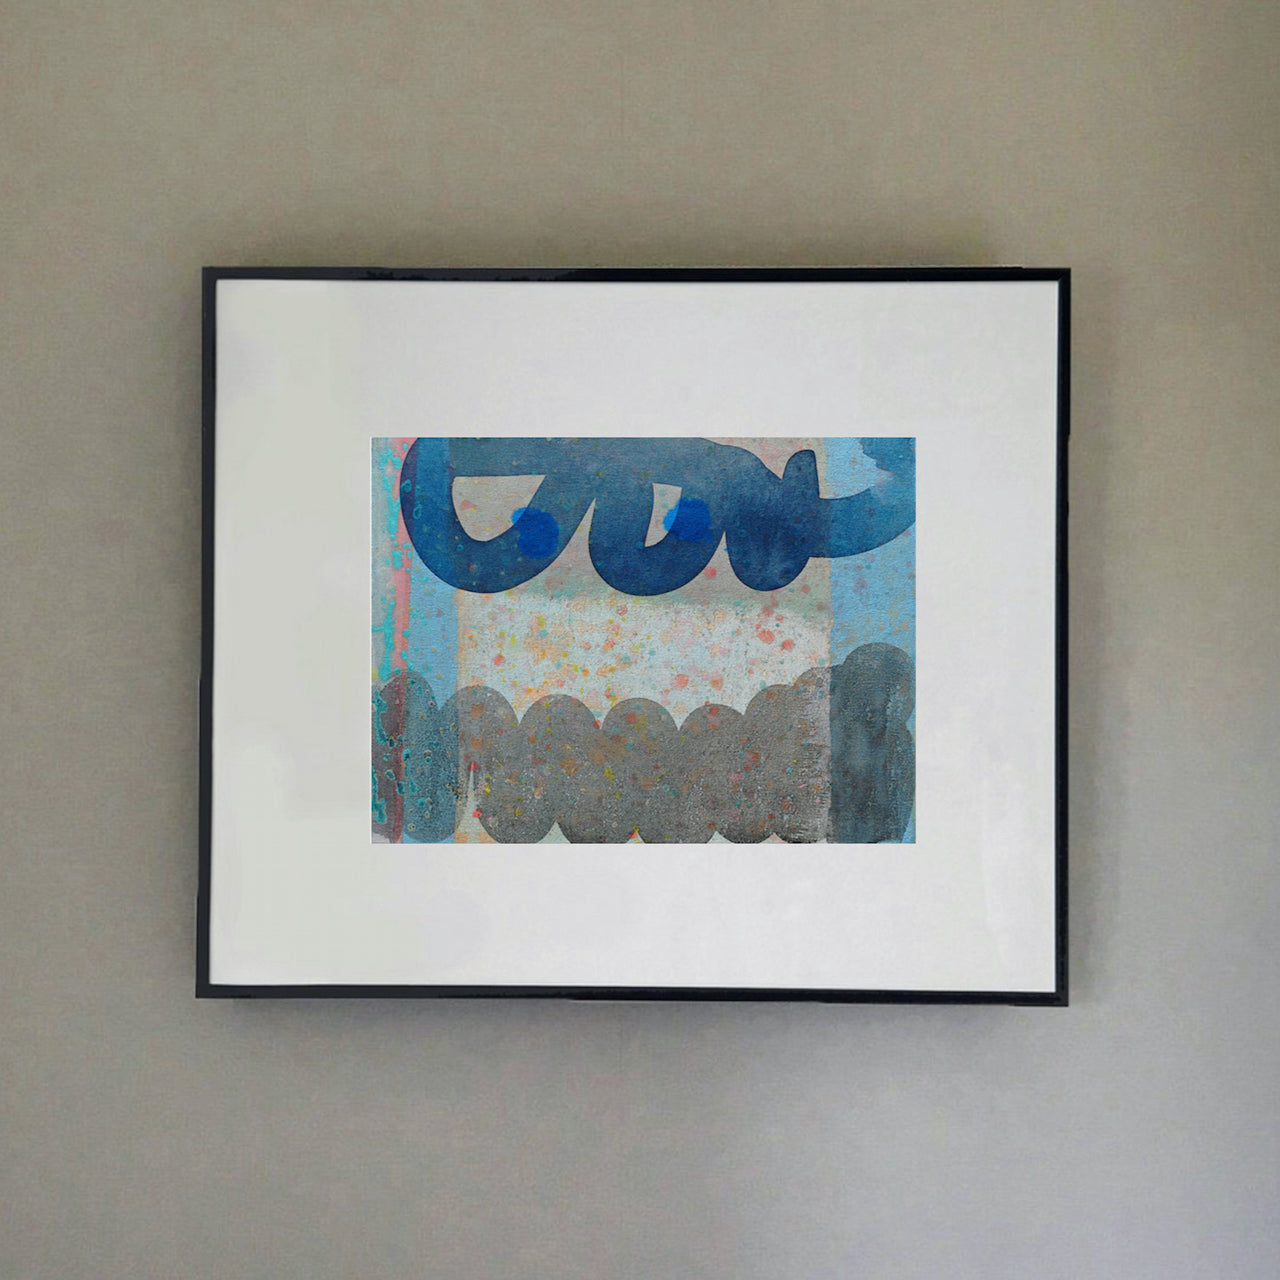 Tones of blue with vibrant darker blue shapes by Cornish artist Ella Carty.